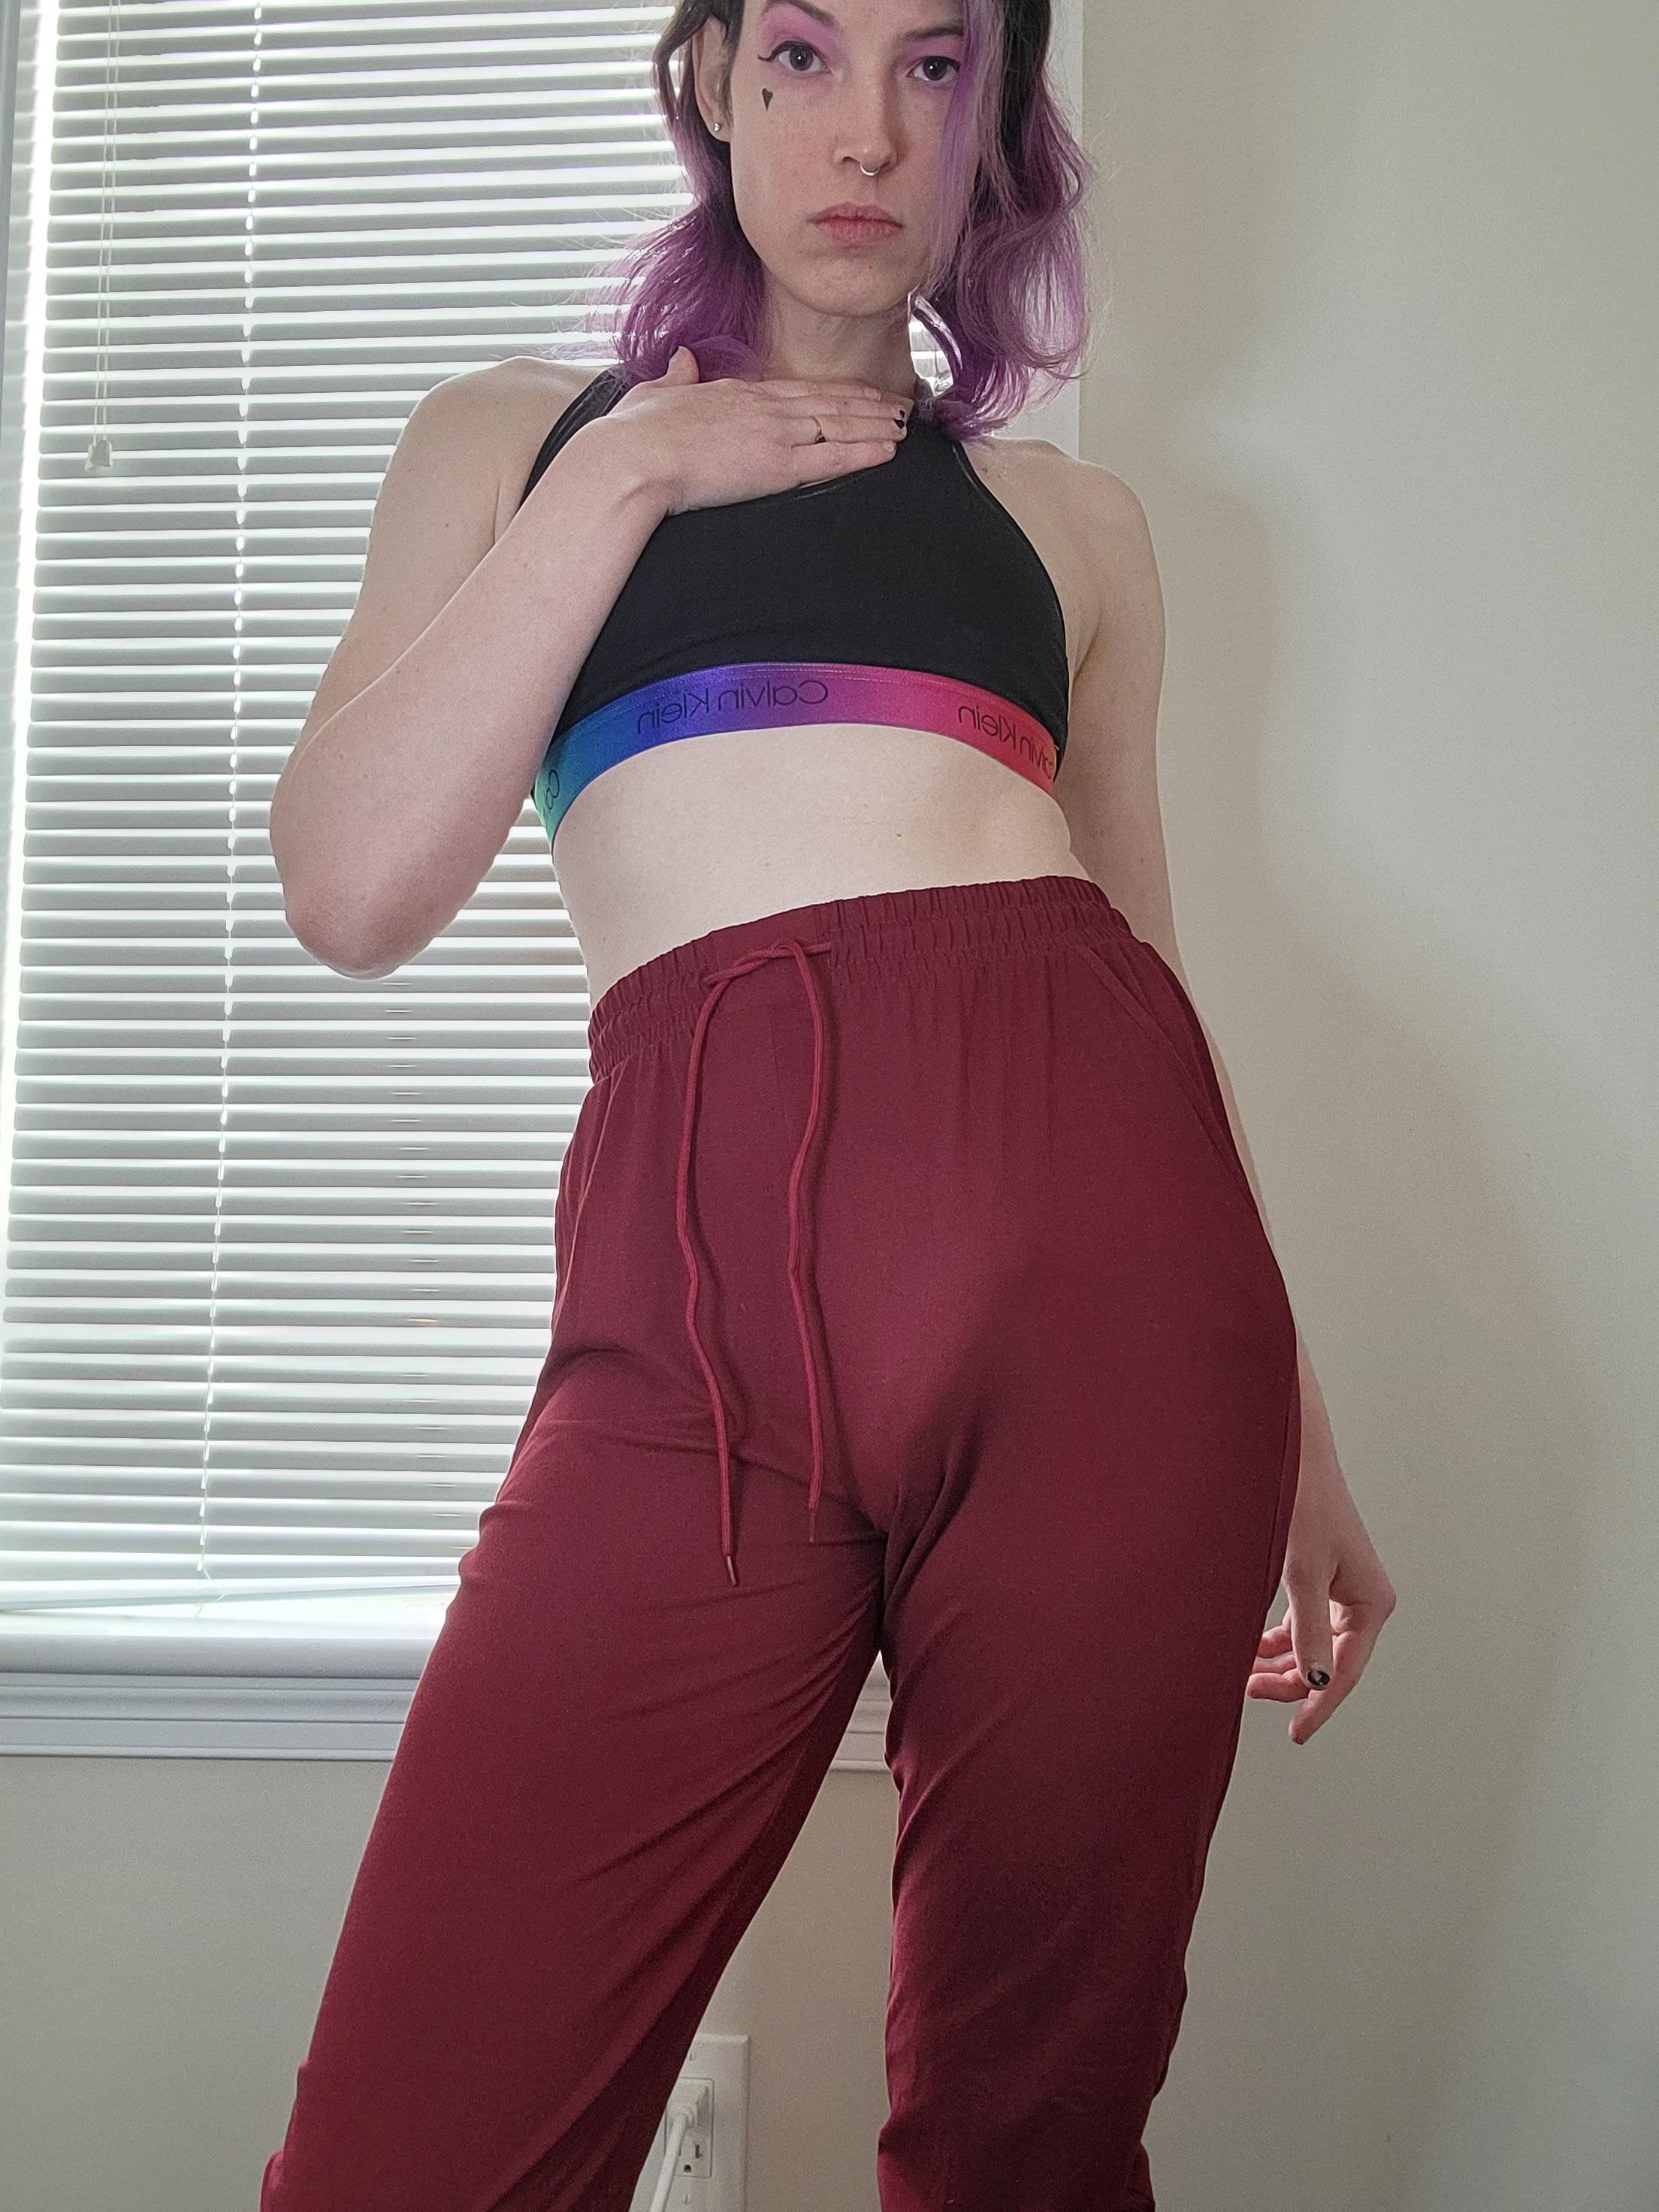 Why is everyone staring at my sweatpants? 1035xph - transexual woman